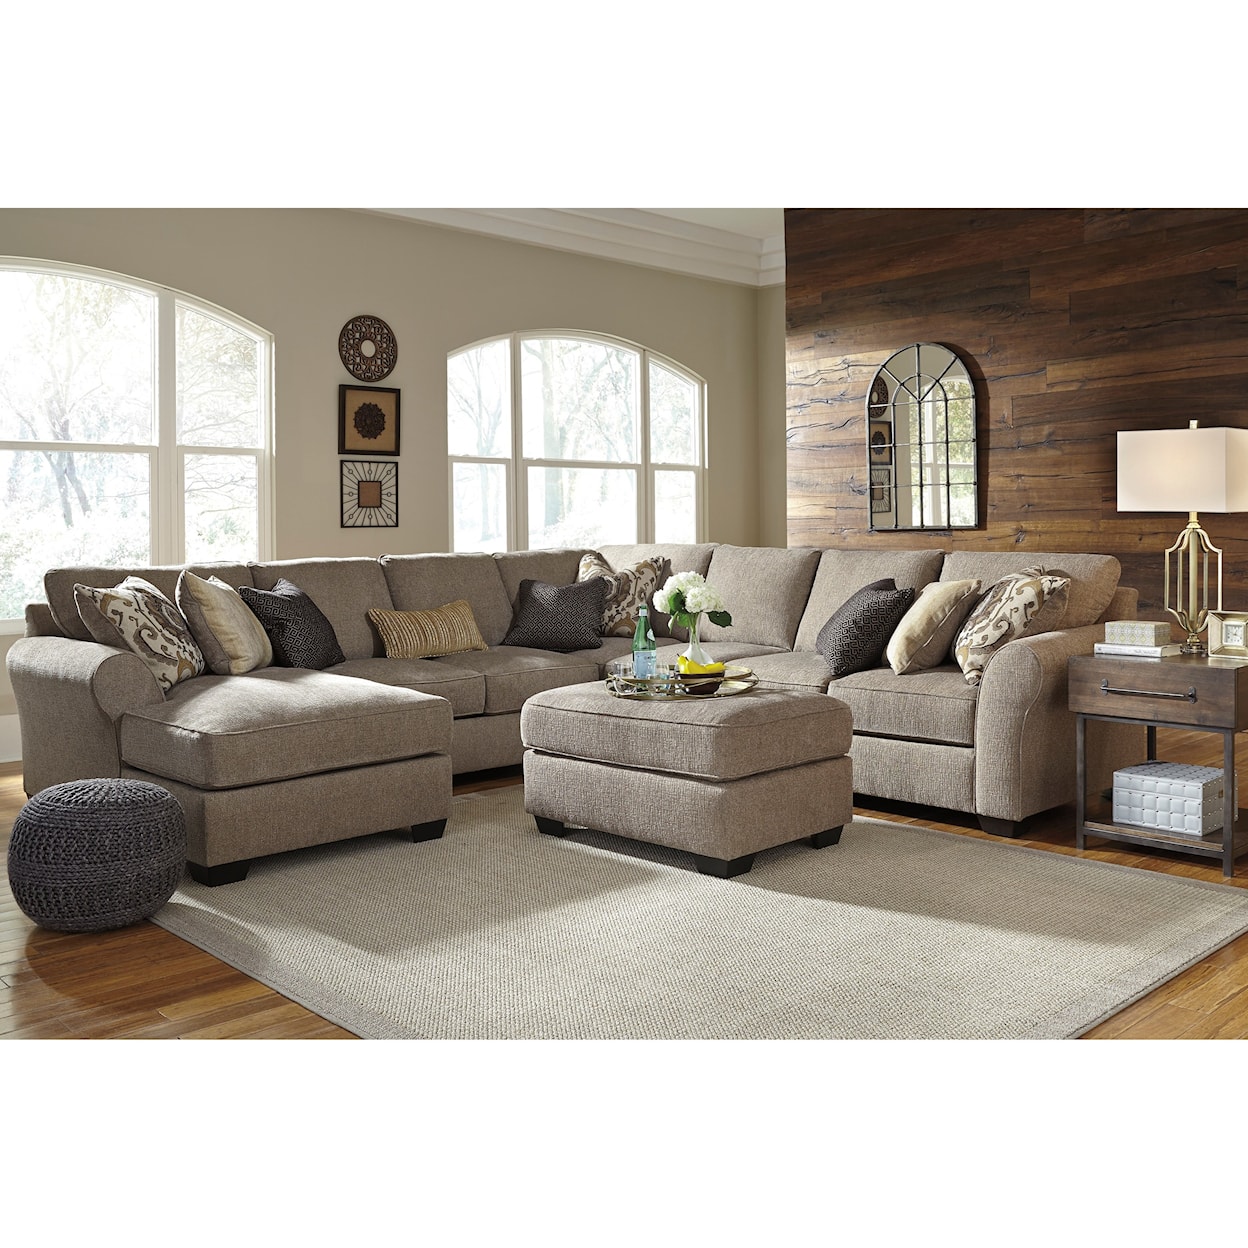 Benchcraft Pantomine 5-Piece Sectional with Ottoman